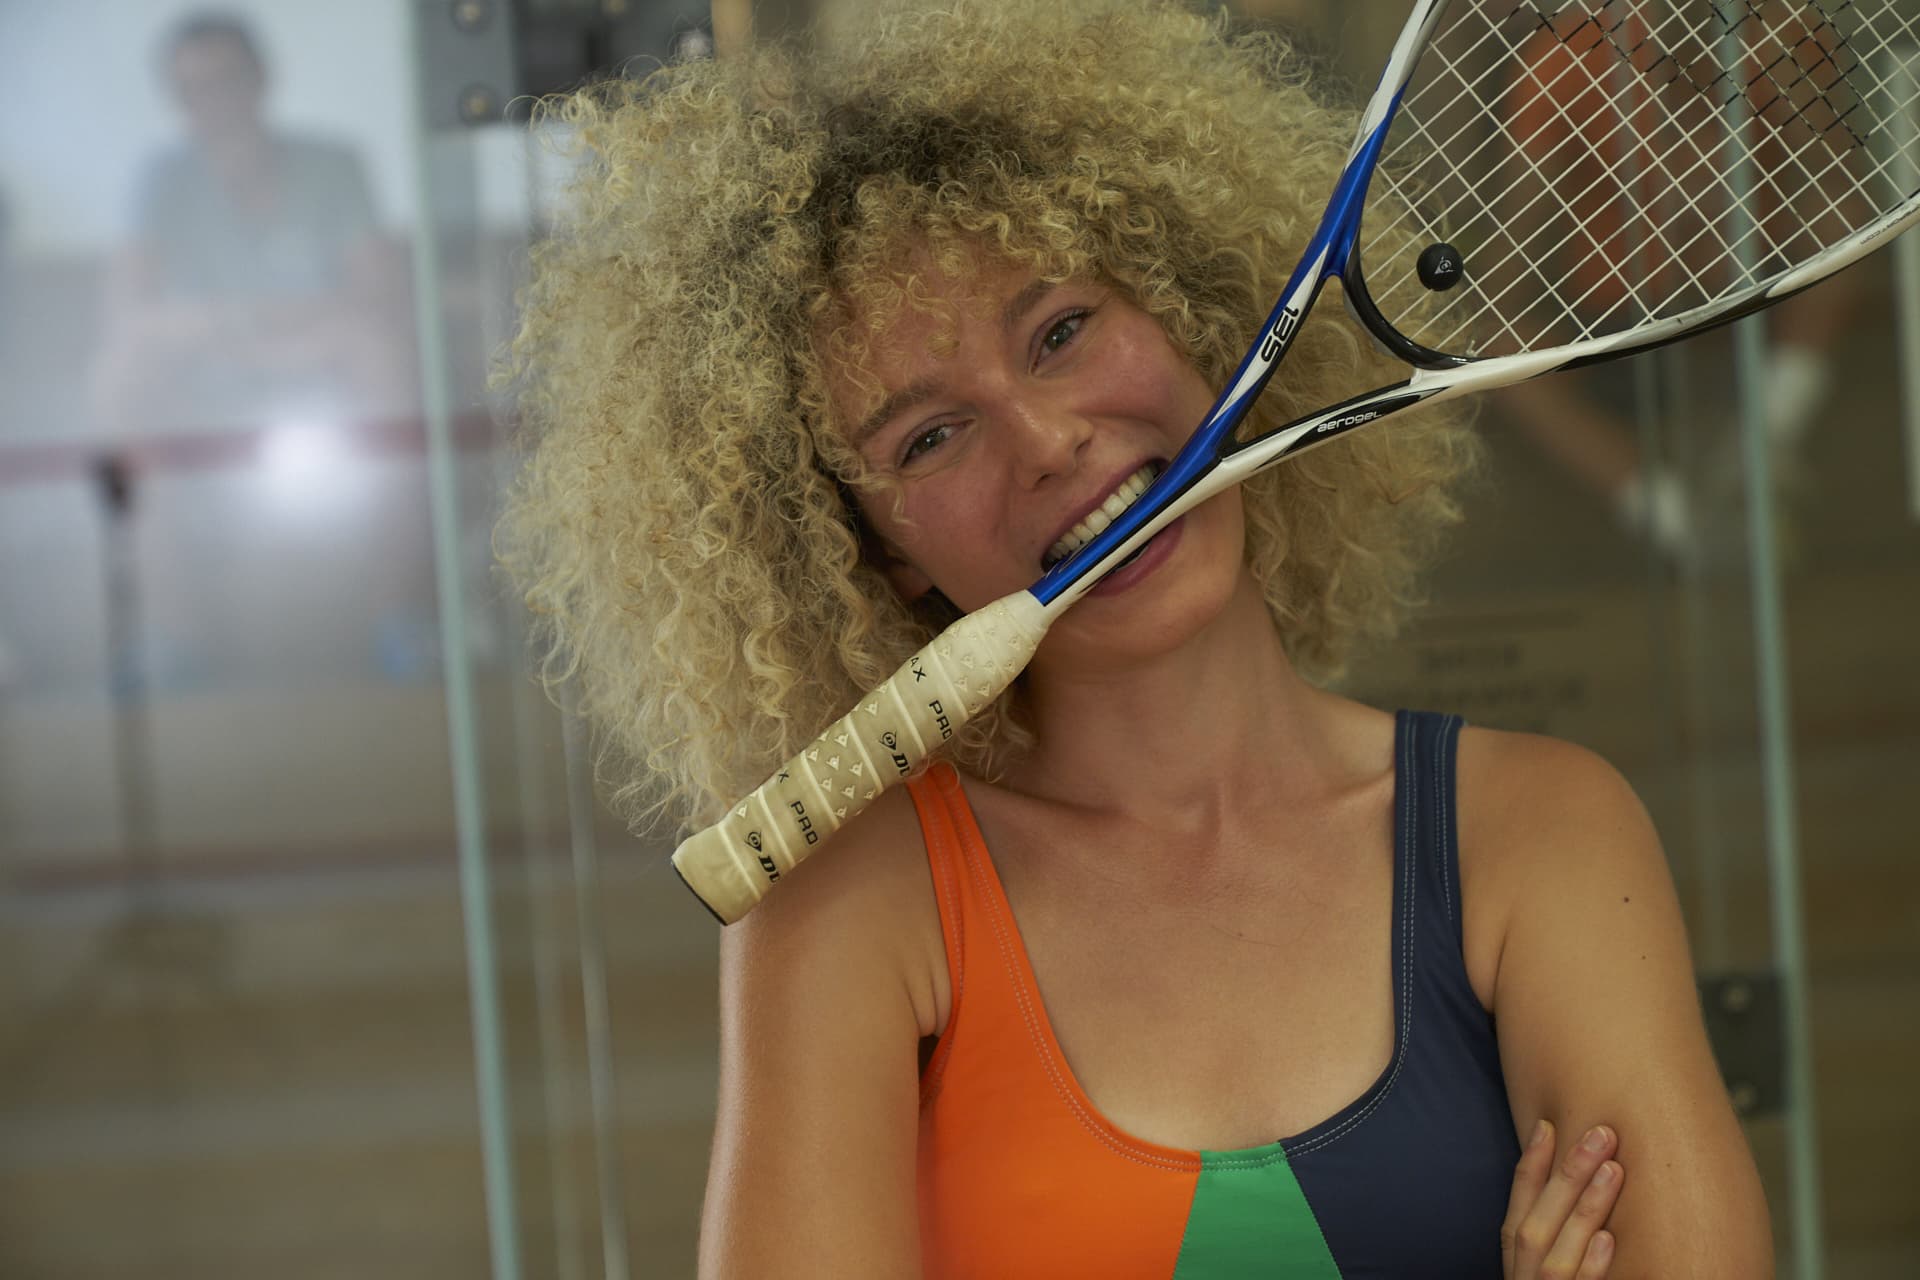 a woman in a good mood with her racket between her teeth on the squash court